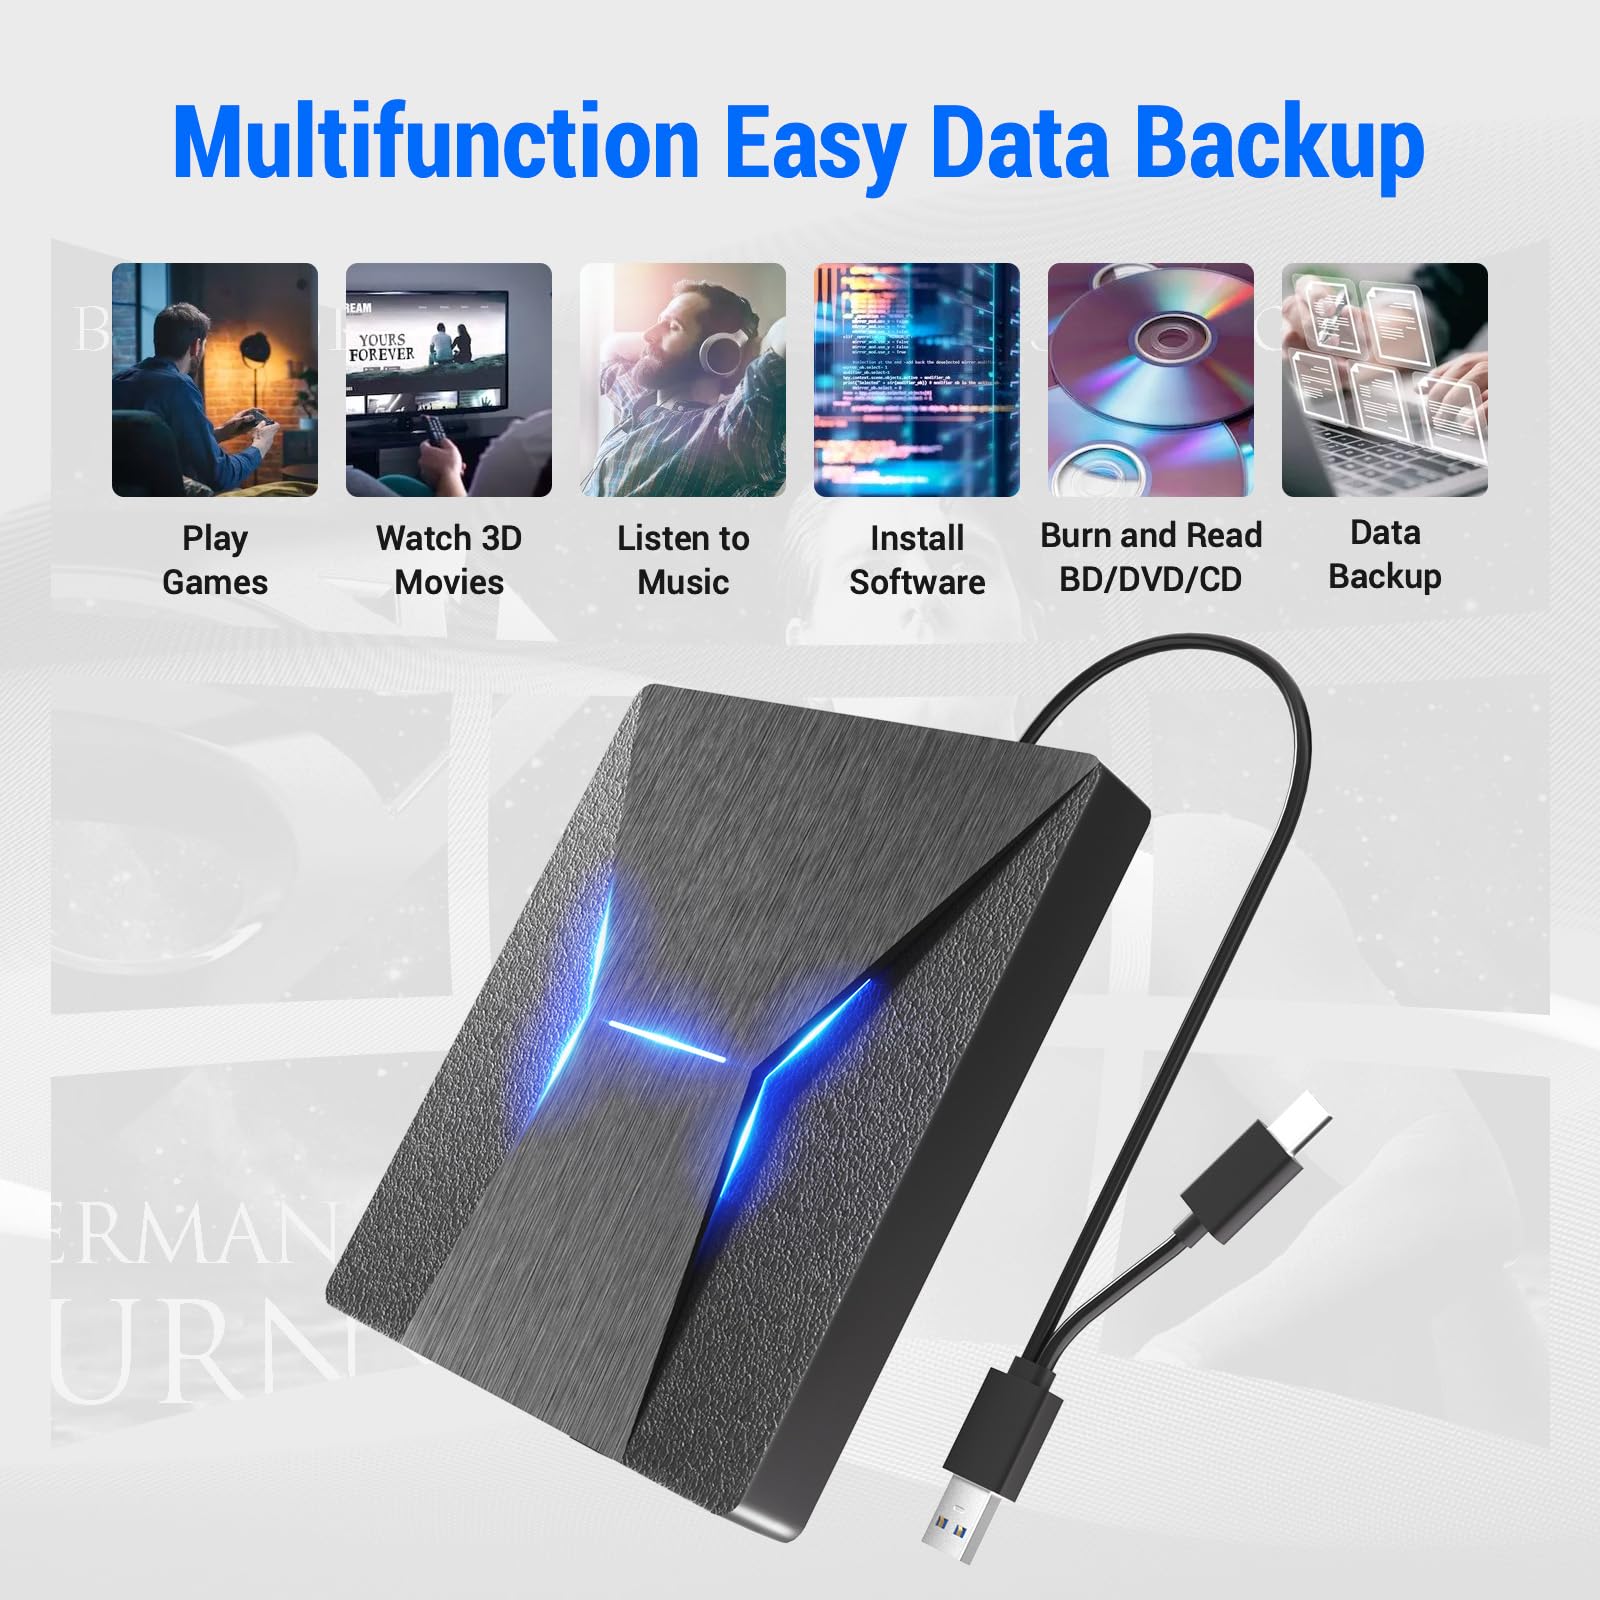 MthsTec External Blu ray Drive, Portable 4K Blu-ray Drive USB 3.0 and Type-C bluray DVD Burner 3D Optical Bluray CD DVD Drive Compatible with MacOS，Windows XP/7/8/10 for Laptop, MacBook, Desktop